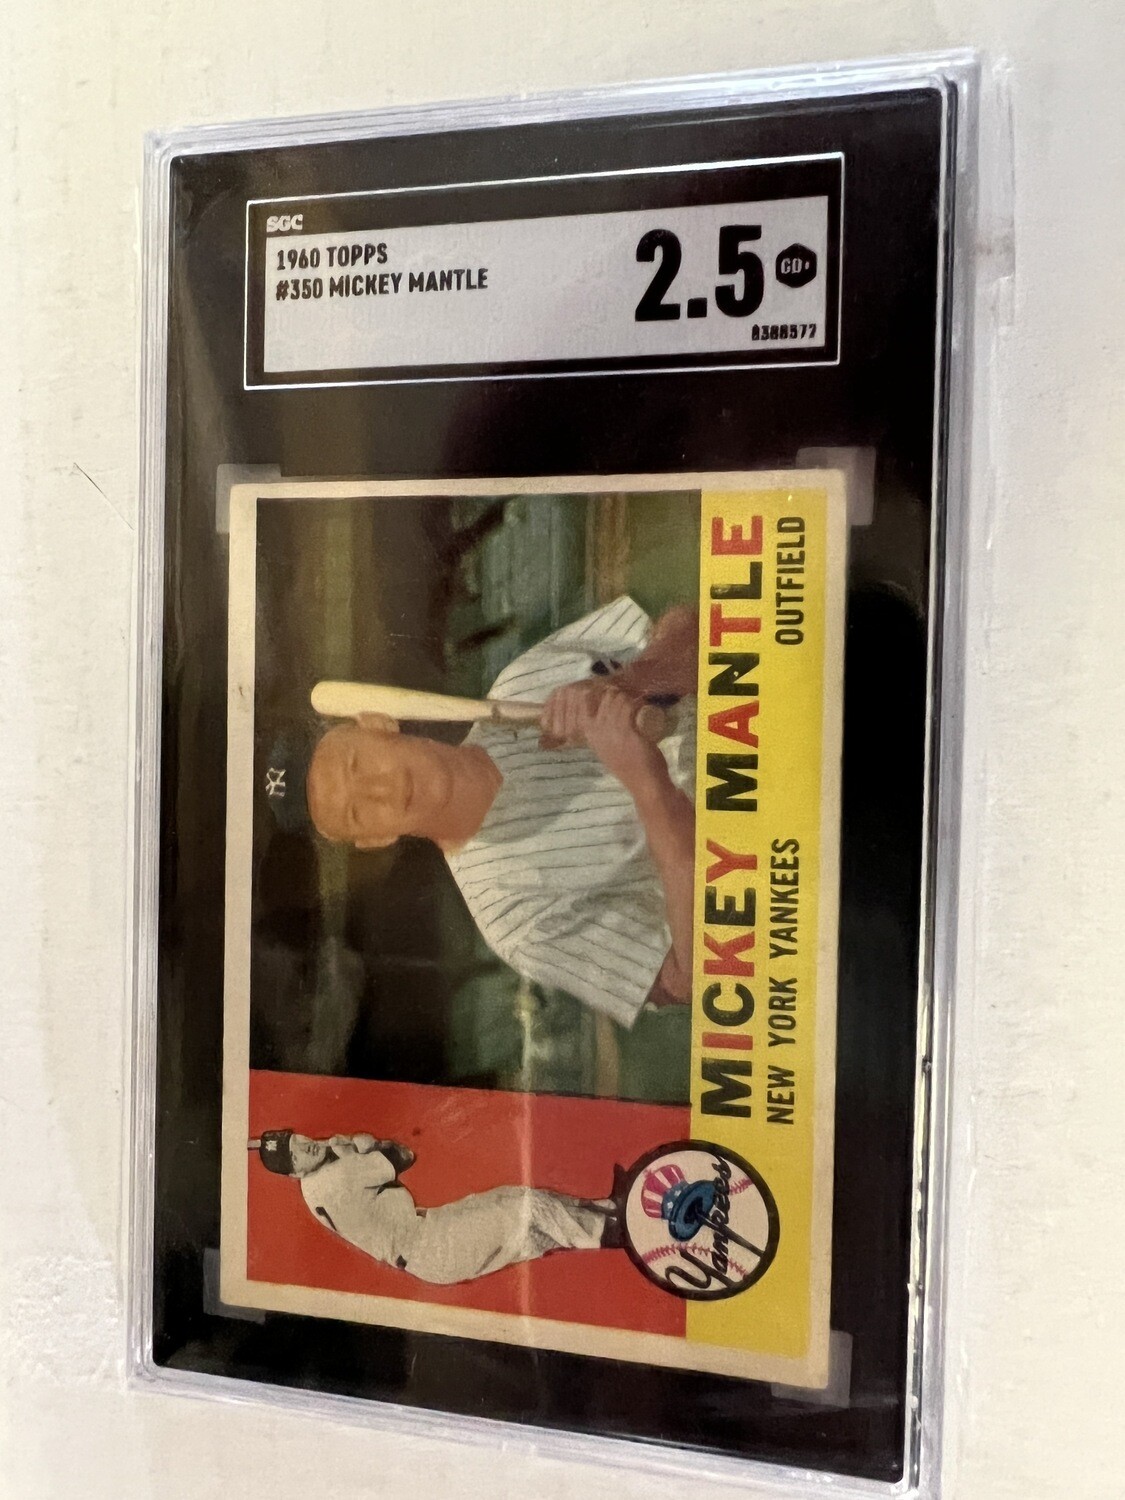 1960 Topps #350 MIckey Mantle SGC 2.5